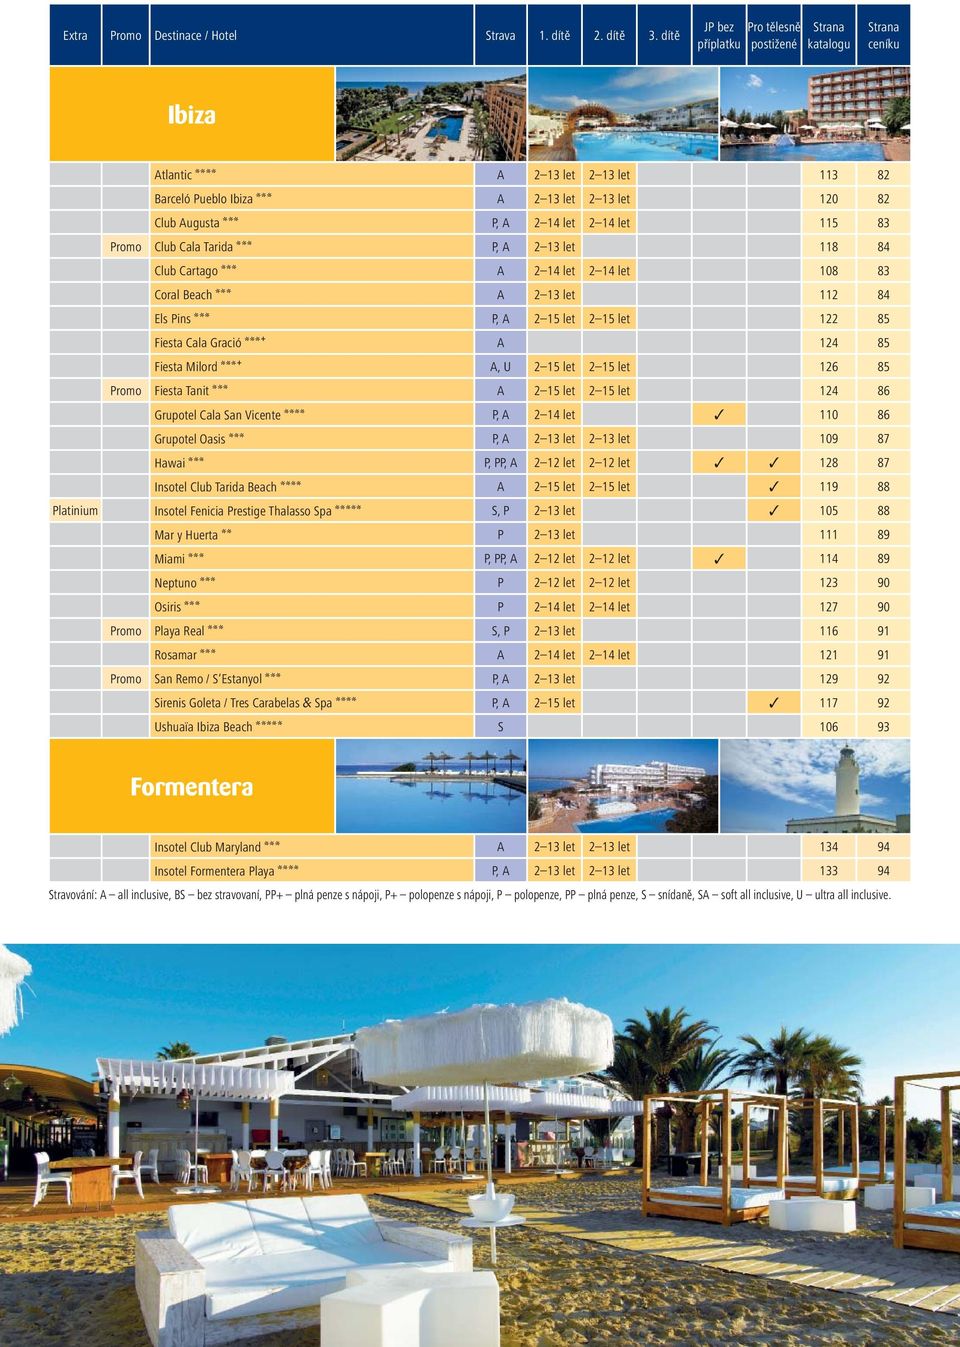 let 2 14 let 115 83 Promo Club Cala Tarida aaa P, A 2 13 let 118 84 Club Cartago aaa A 2 14 let 2 14 let 108 83 Coral Beach aaa A 2 13 let 112 84 Els Pins aaa P, A 2 15 let 2 15 let 122 85 Fiesta